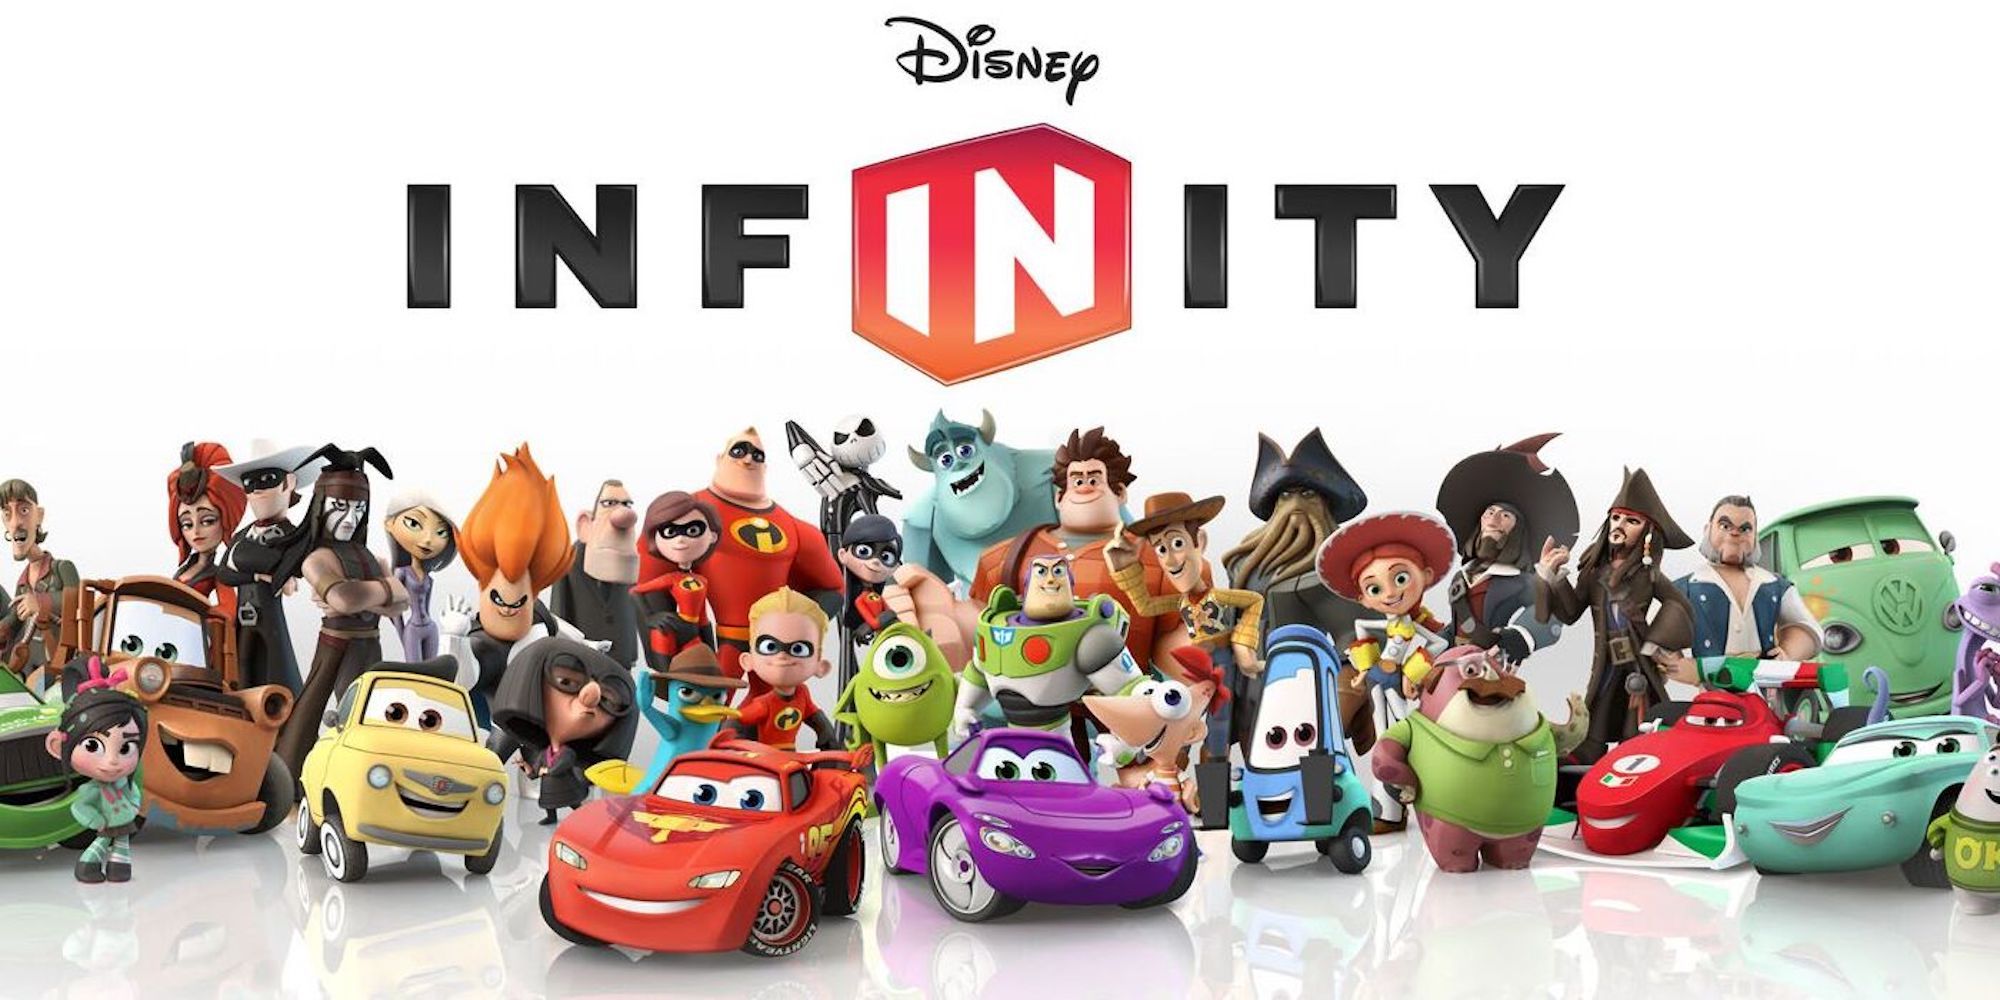 Promo art featuring characters in Disney Infinity